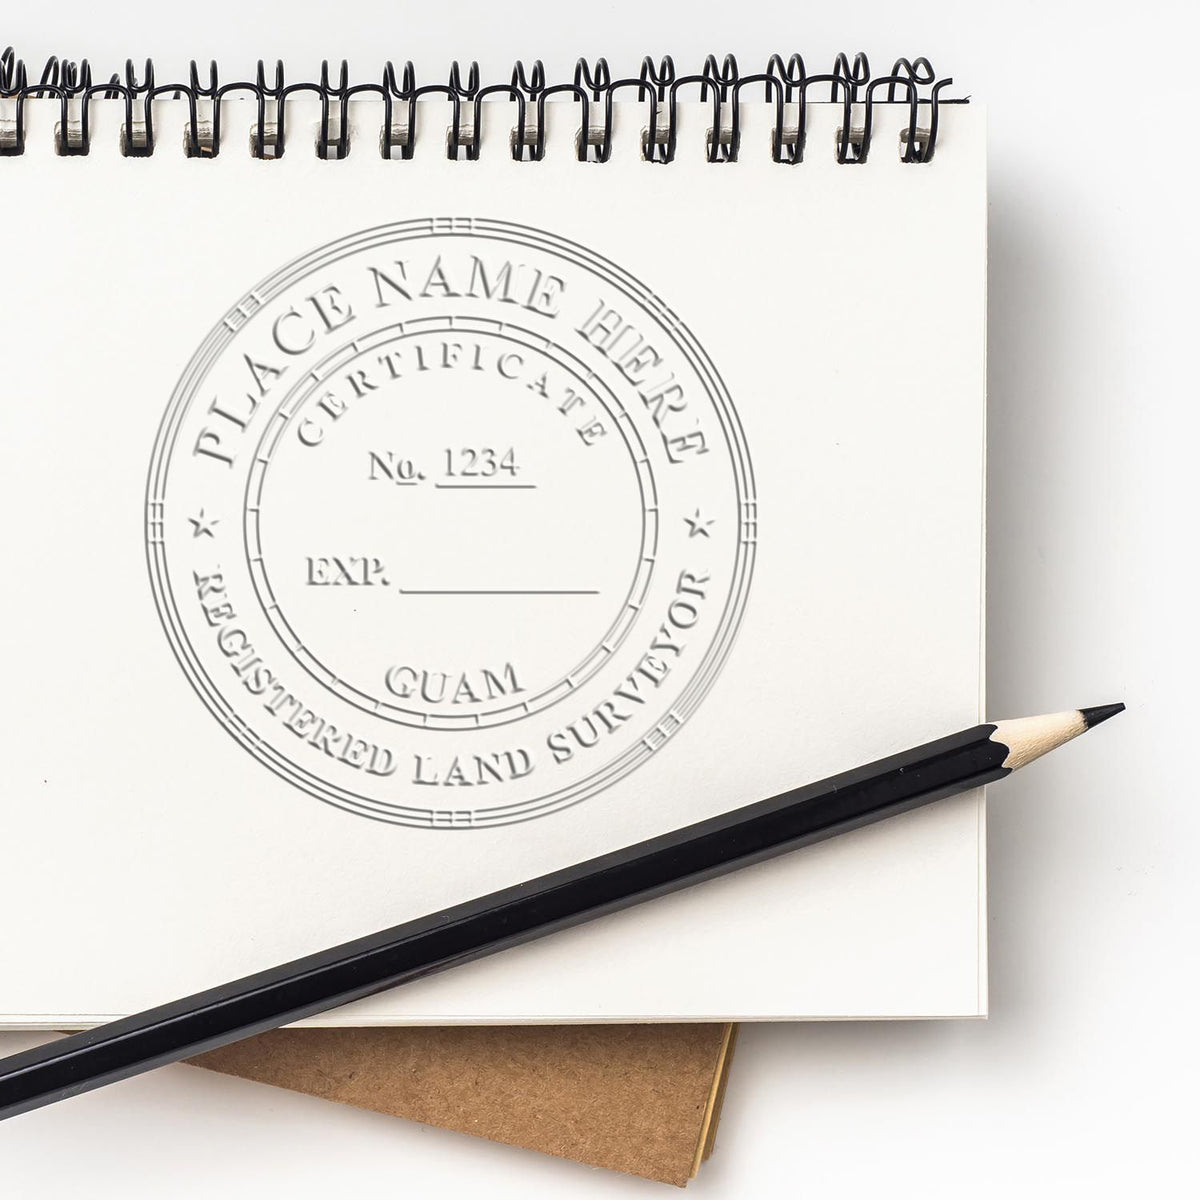 An alternative view of the Hybrid Guam Land Surveyor Seal stamped on a sheet of paper showing the image in use